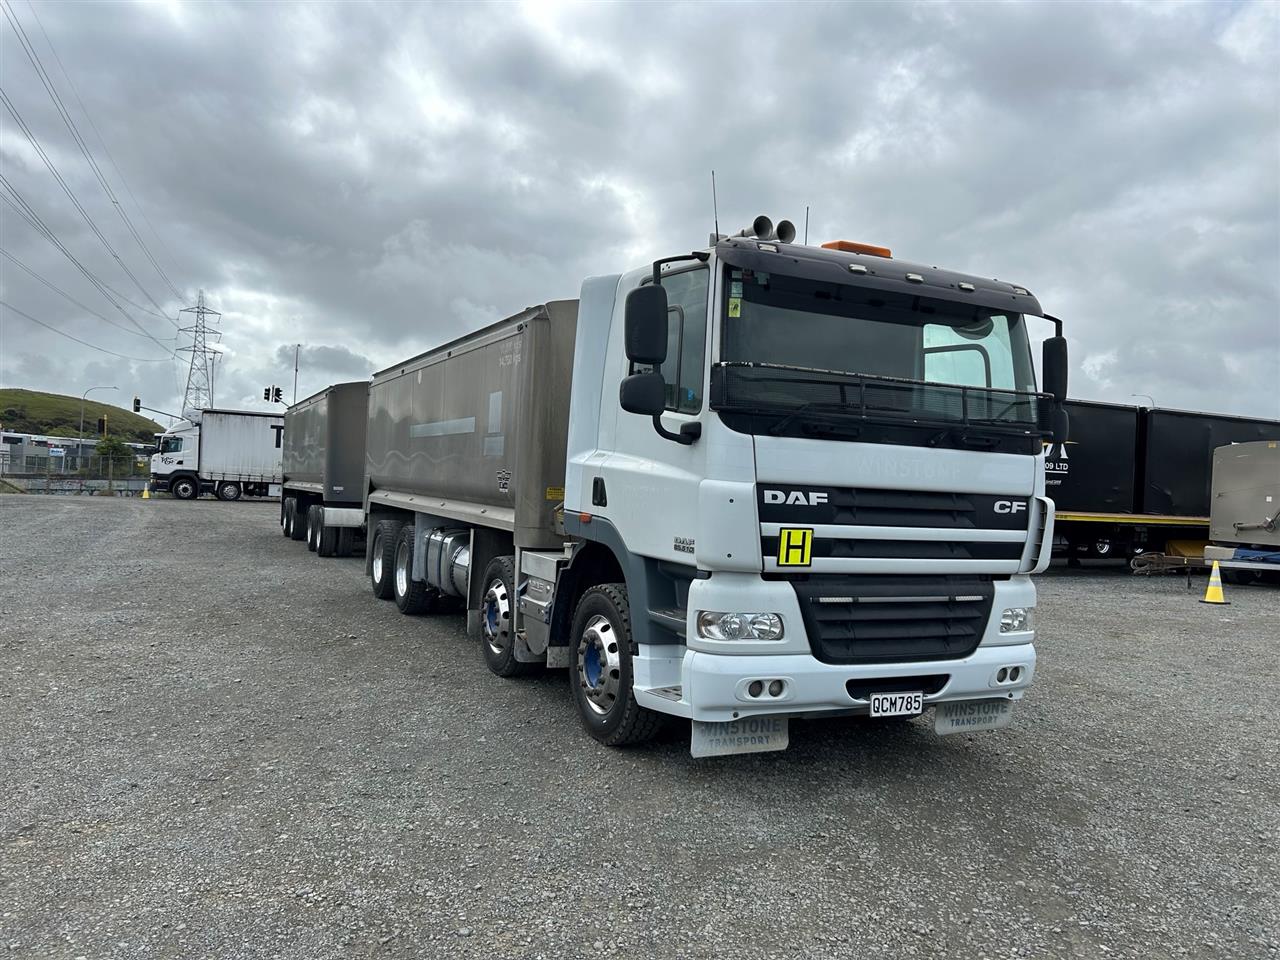 2015 DAF CF - 8x4 Alloy Bulky with 4 Axle Trailer 631F6